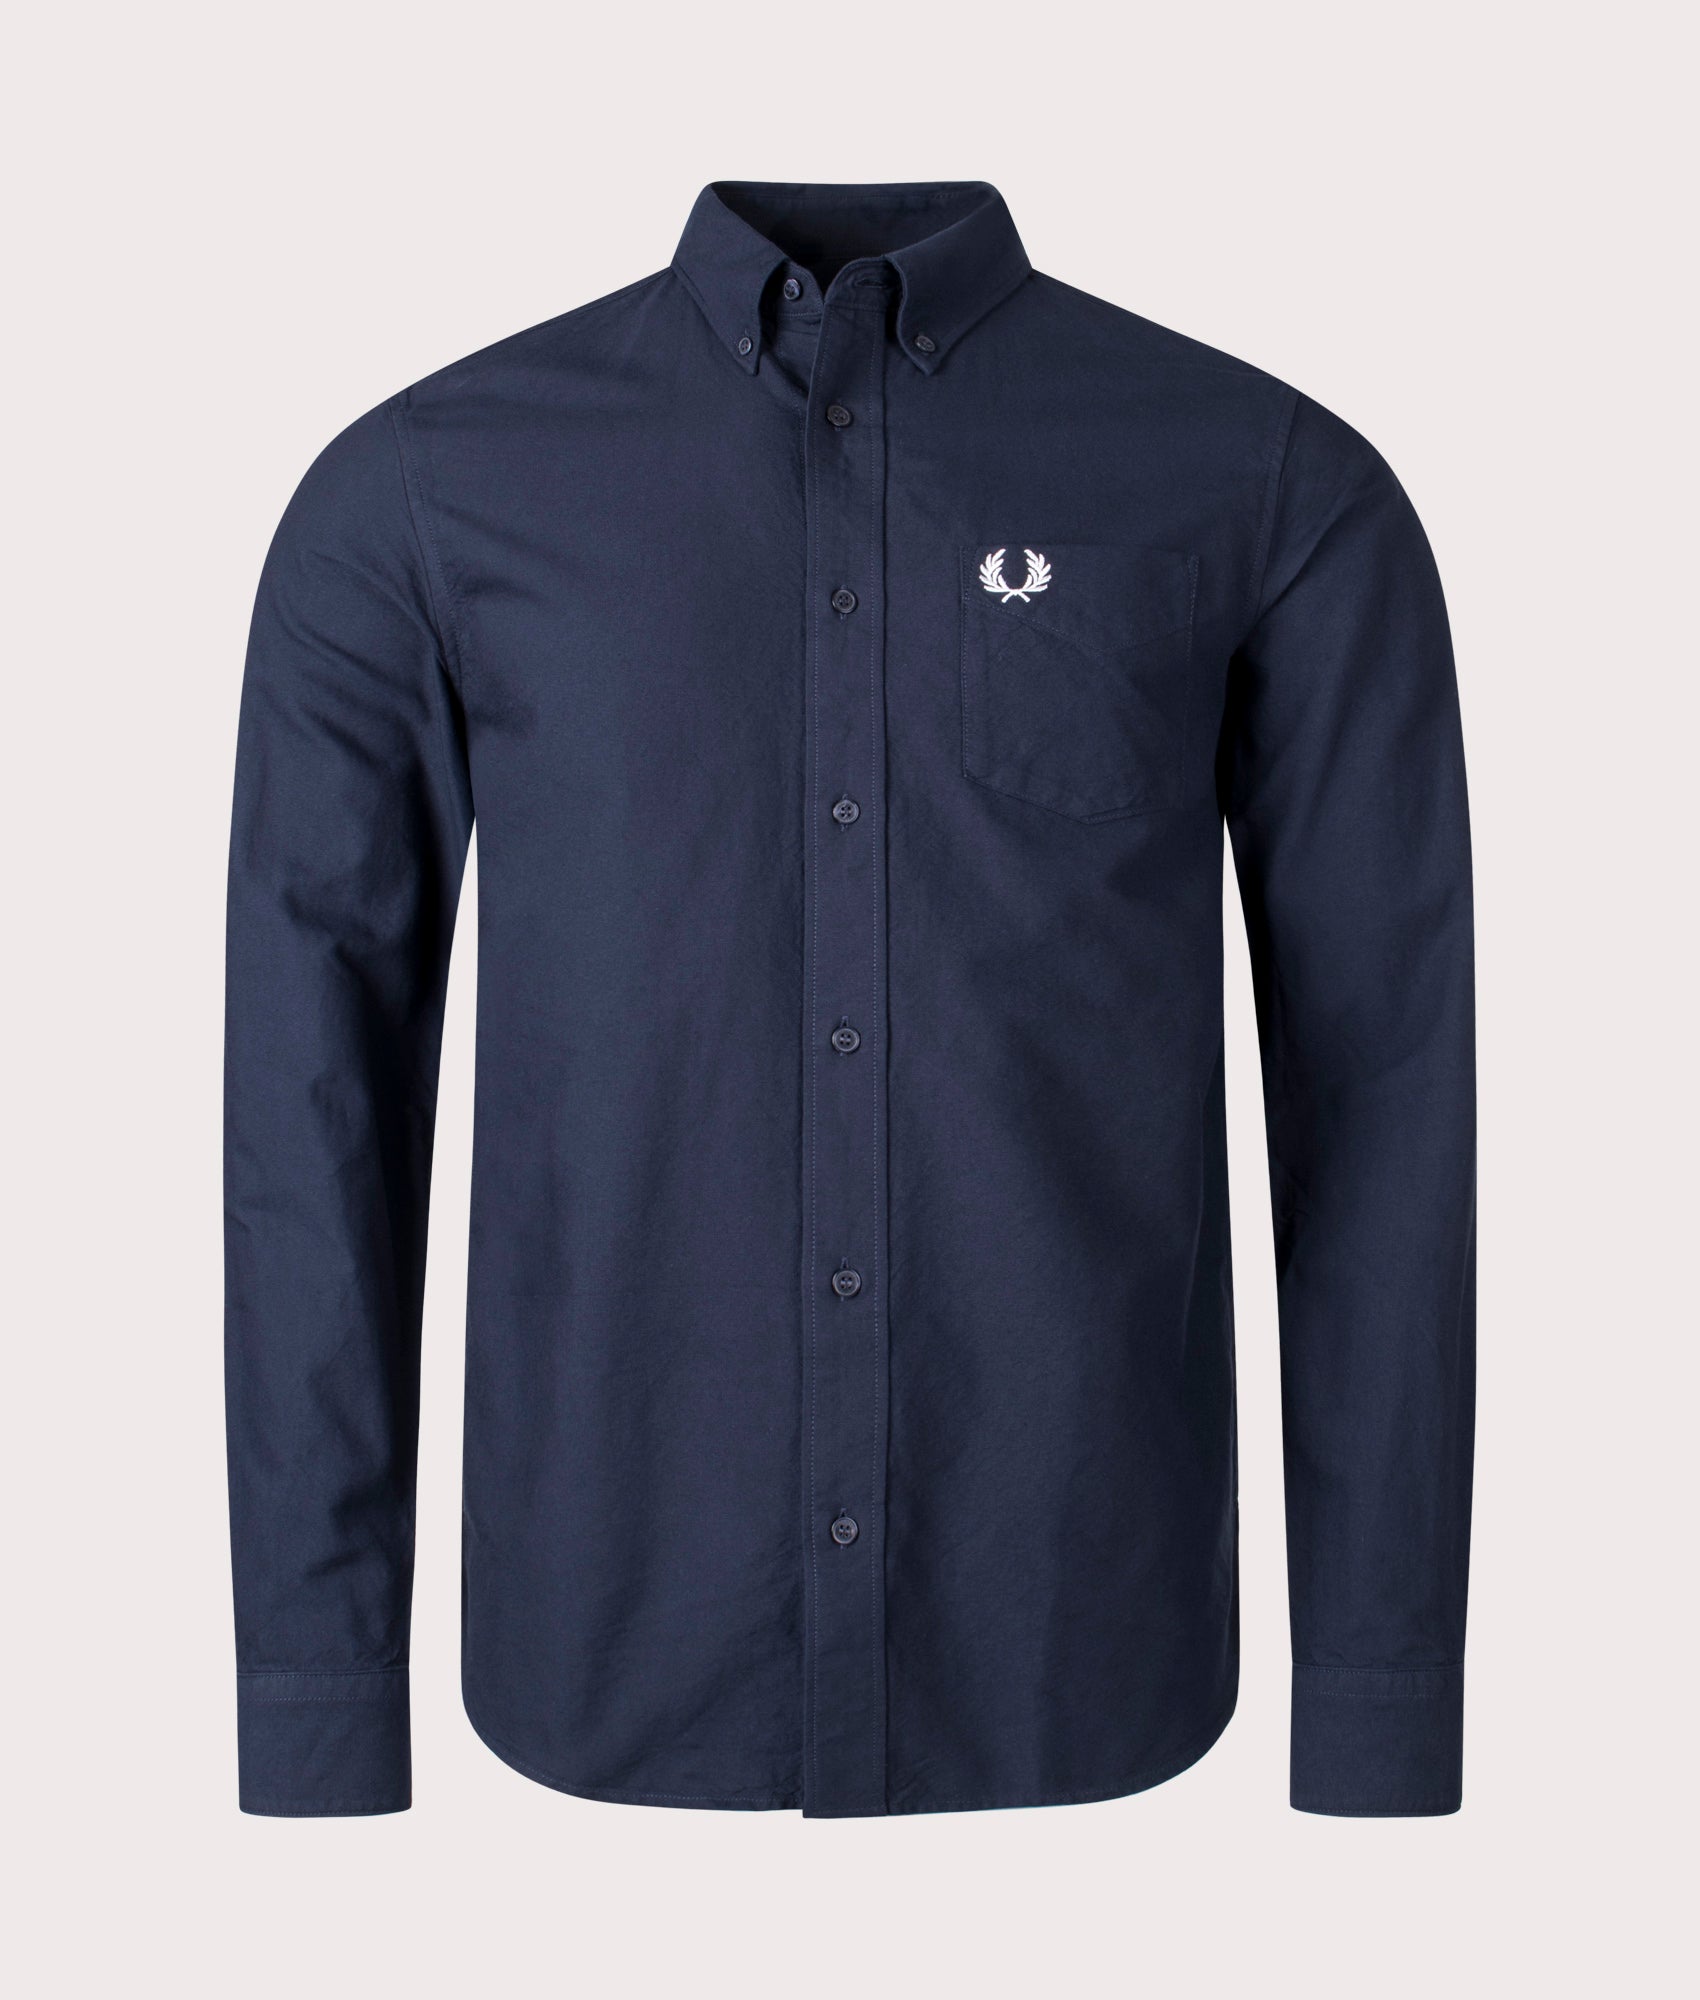 Fred Perry Mens Oxford Shirt - Colour: 608 Navy - Size: Large